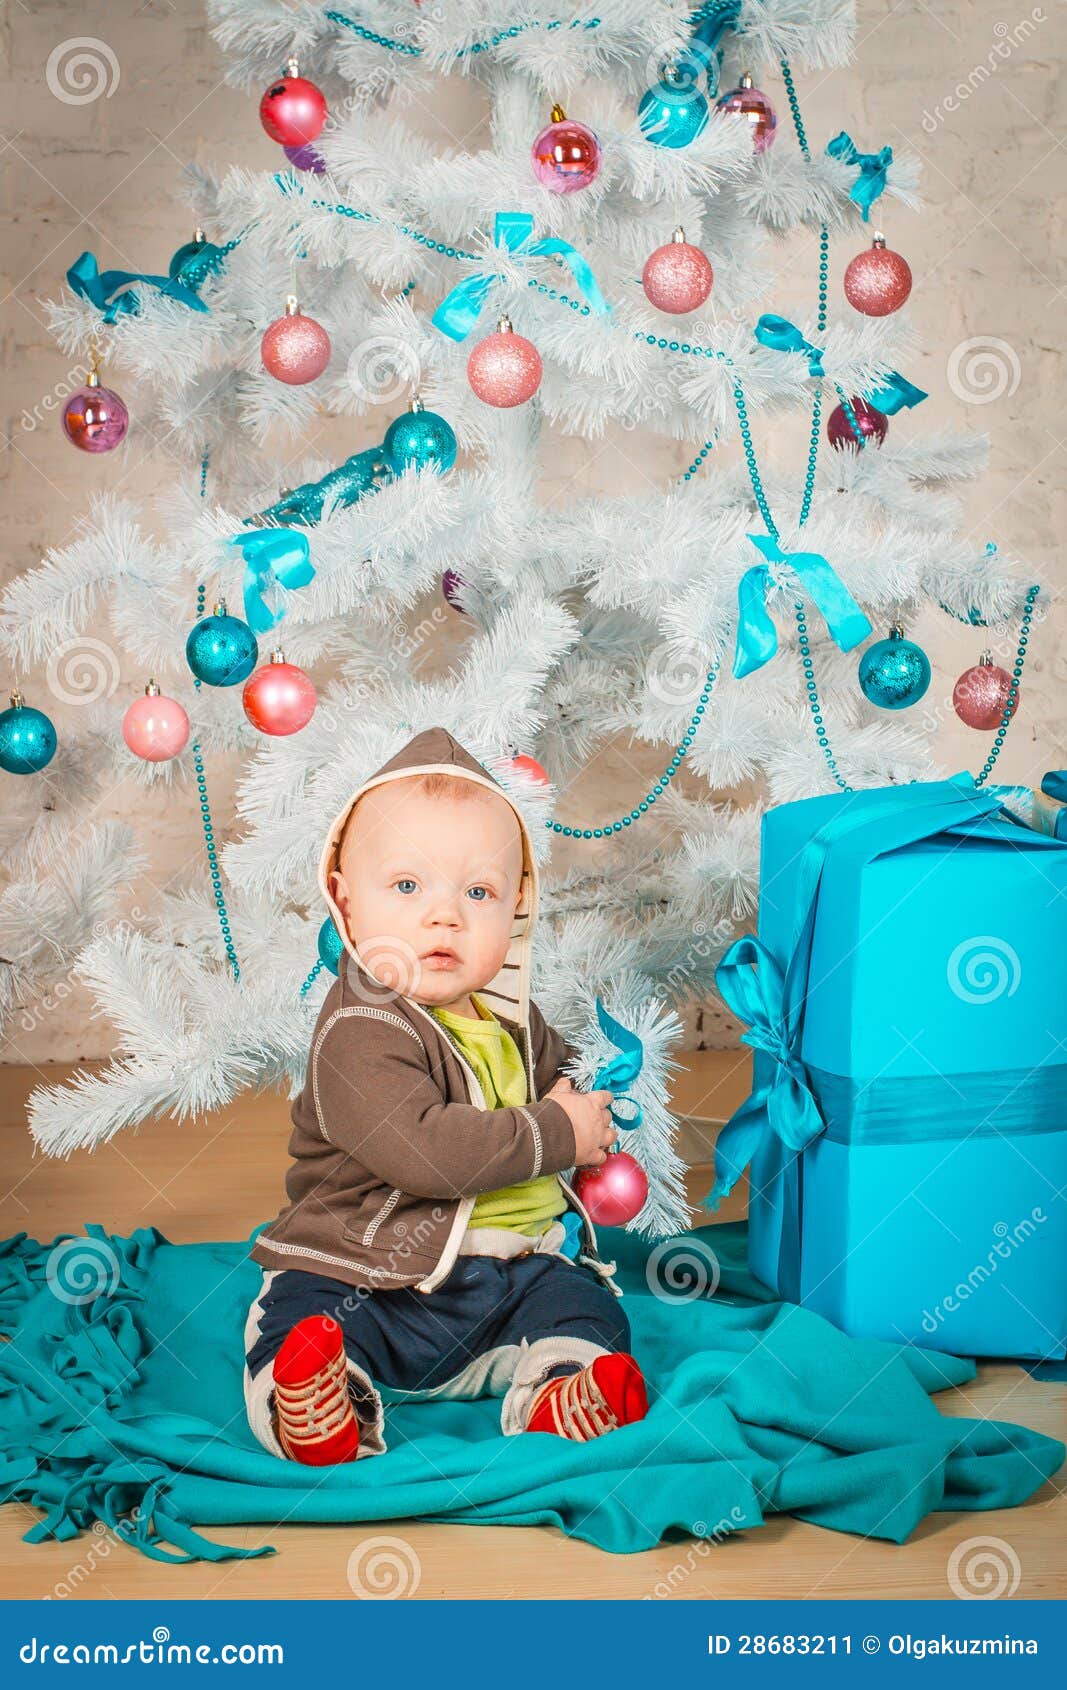 A Baby with Gifts at Christmas Tree Stock Image - Image of male ...